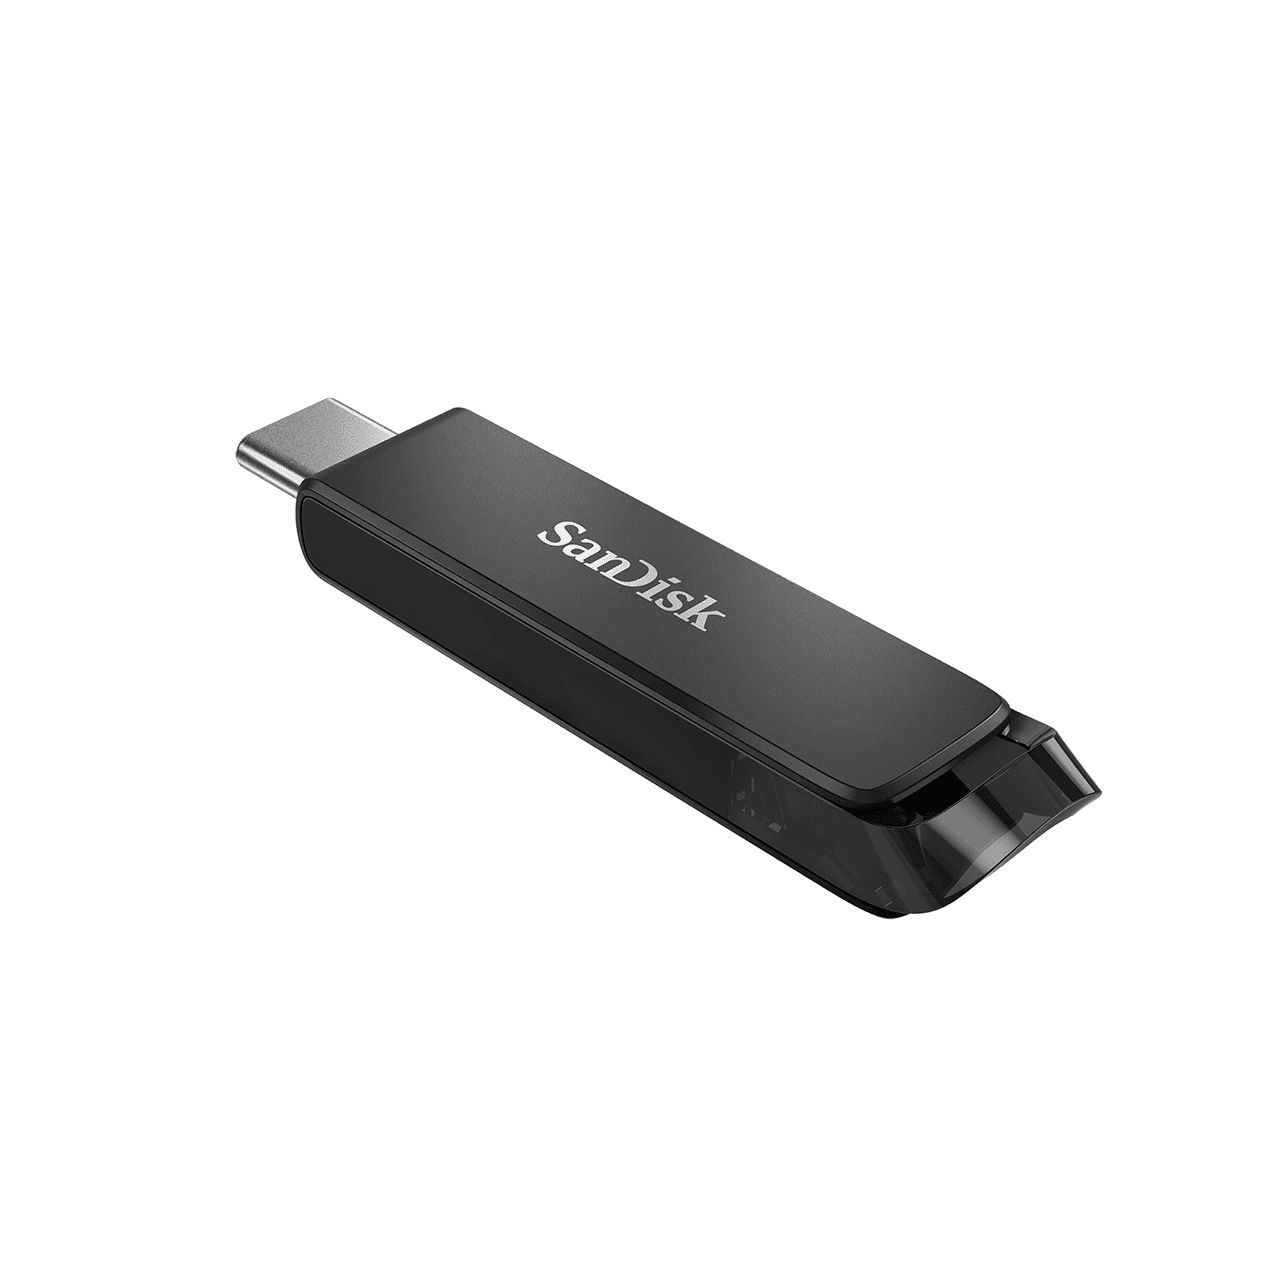 SDCZ460-64G-G46 - Pendrive SANDISK Flash Drive 64Gb USB-C 3.0 Lectura 150 Mb/s Negro (SDCZ460-64G-G46)